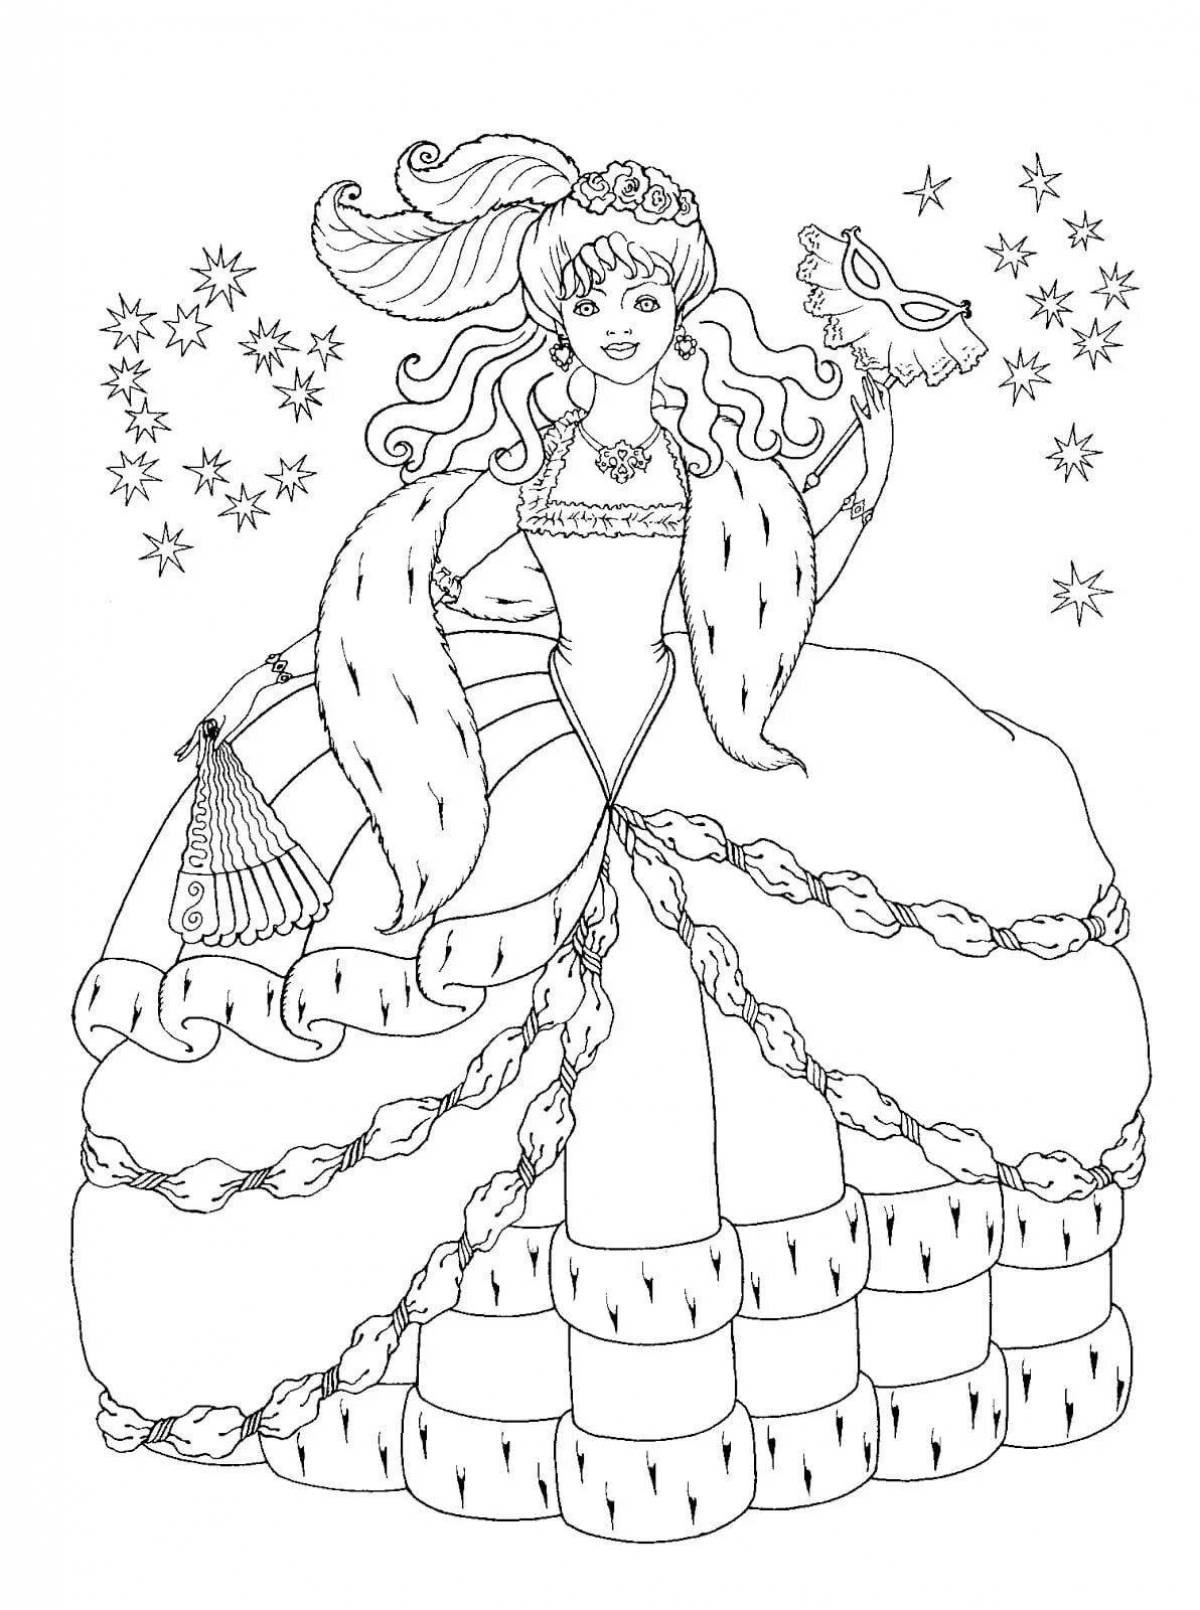 Amazing princess coloring pages for girls 7 years old